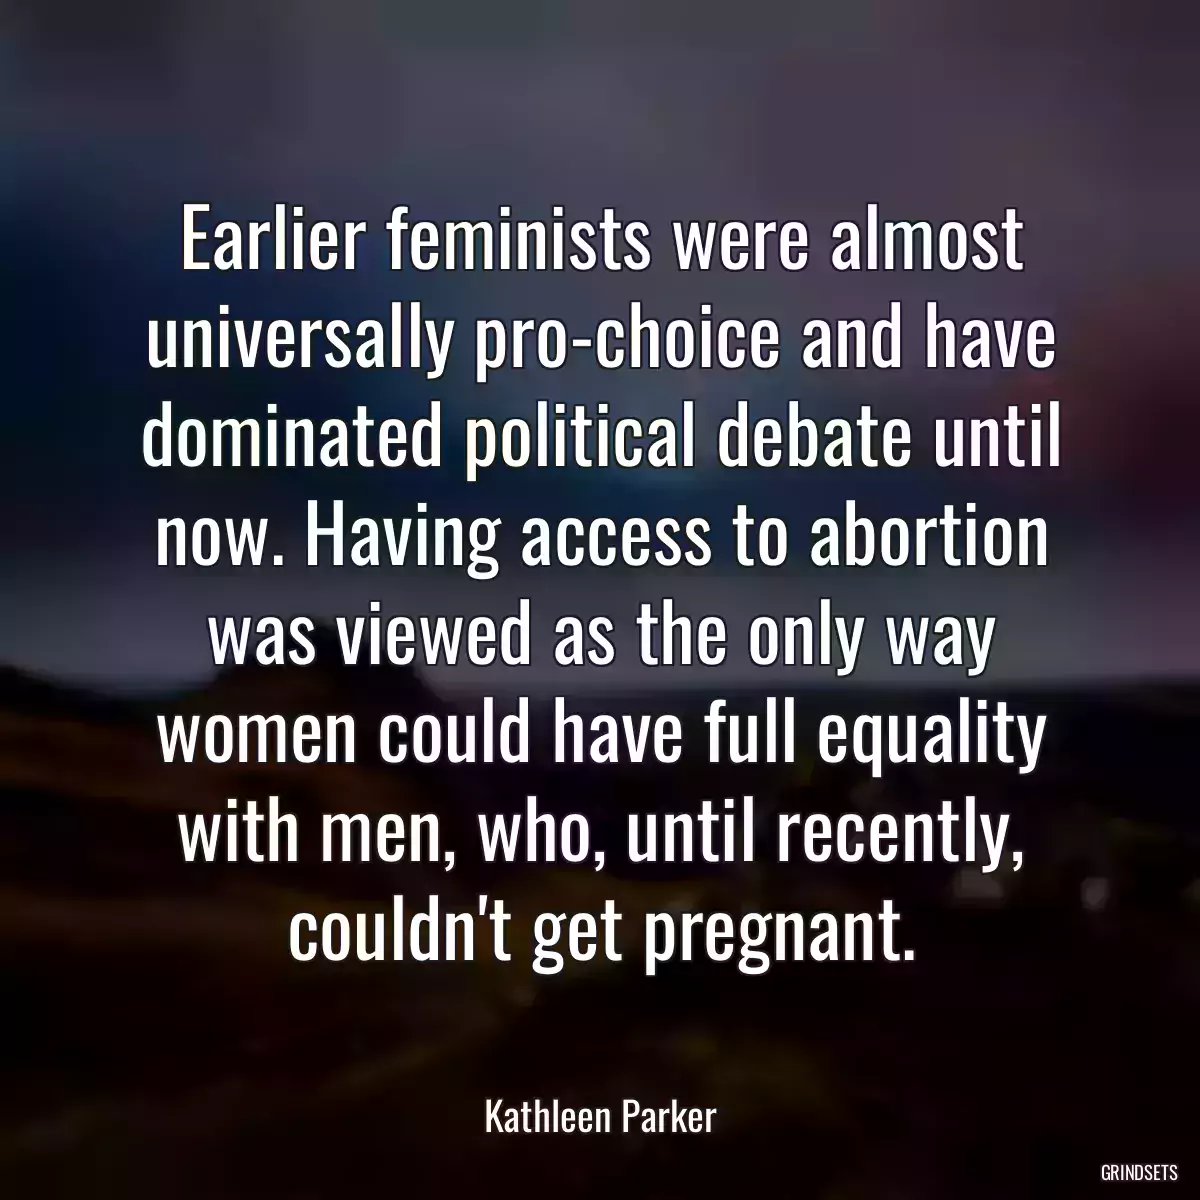 Earlier feminists were almost universally pro-choice and have dominated political debate until now. Having access to abortion was viewed as the only way women could have full equality with men, who, until recently, couldn\'t get pregnant.